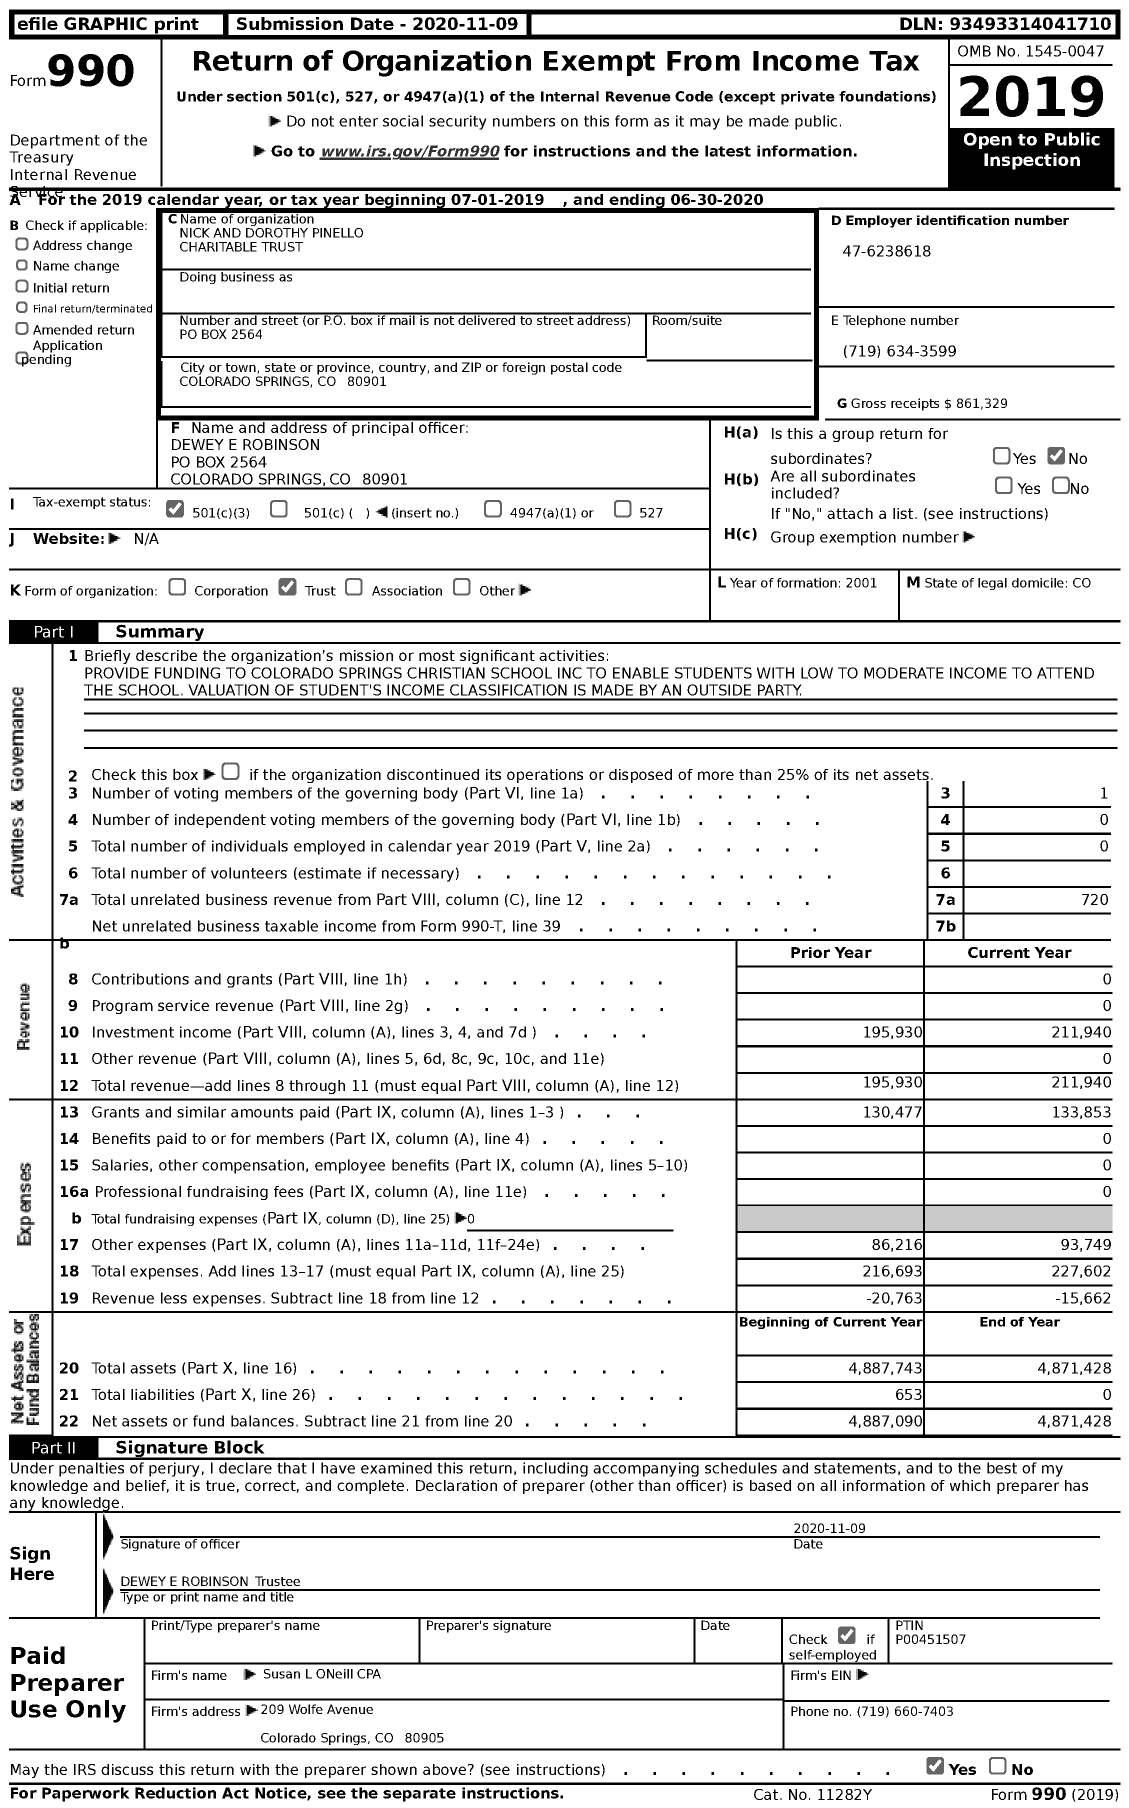 Image of first page of 2019 Form 990 for Nick and Dorothy Pinello Charitable Trust